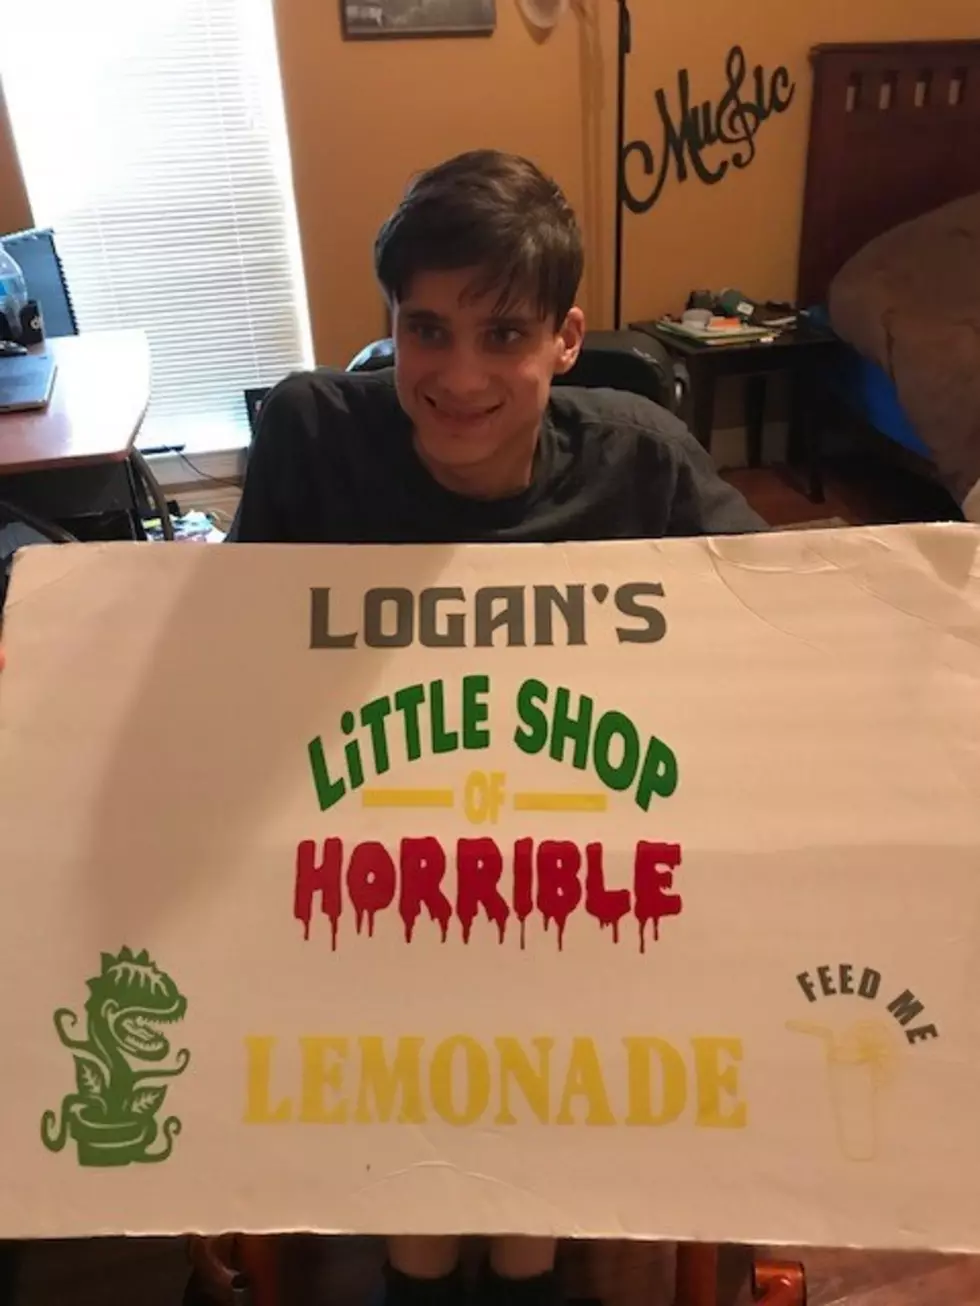 Special Needs Student Needs Your Help Raising Money For CYT &#8216;Little Shop Of Horrors&#8217; Prop [Photo]